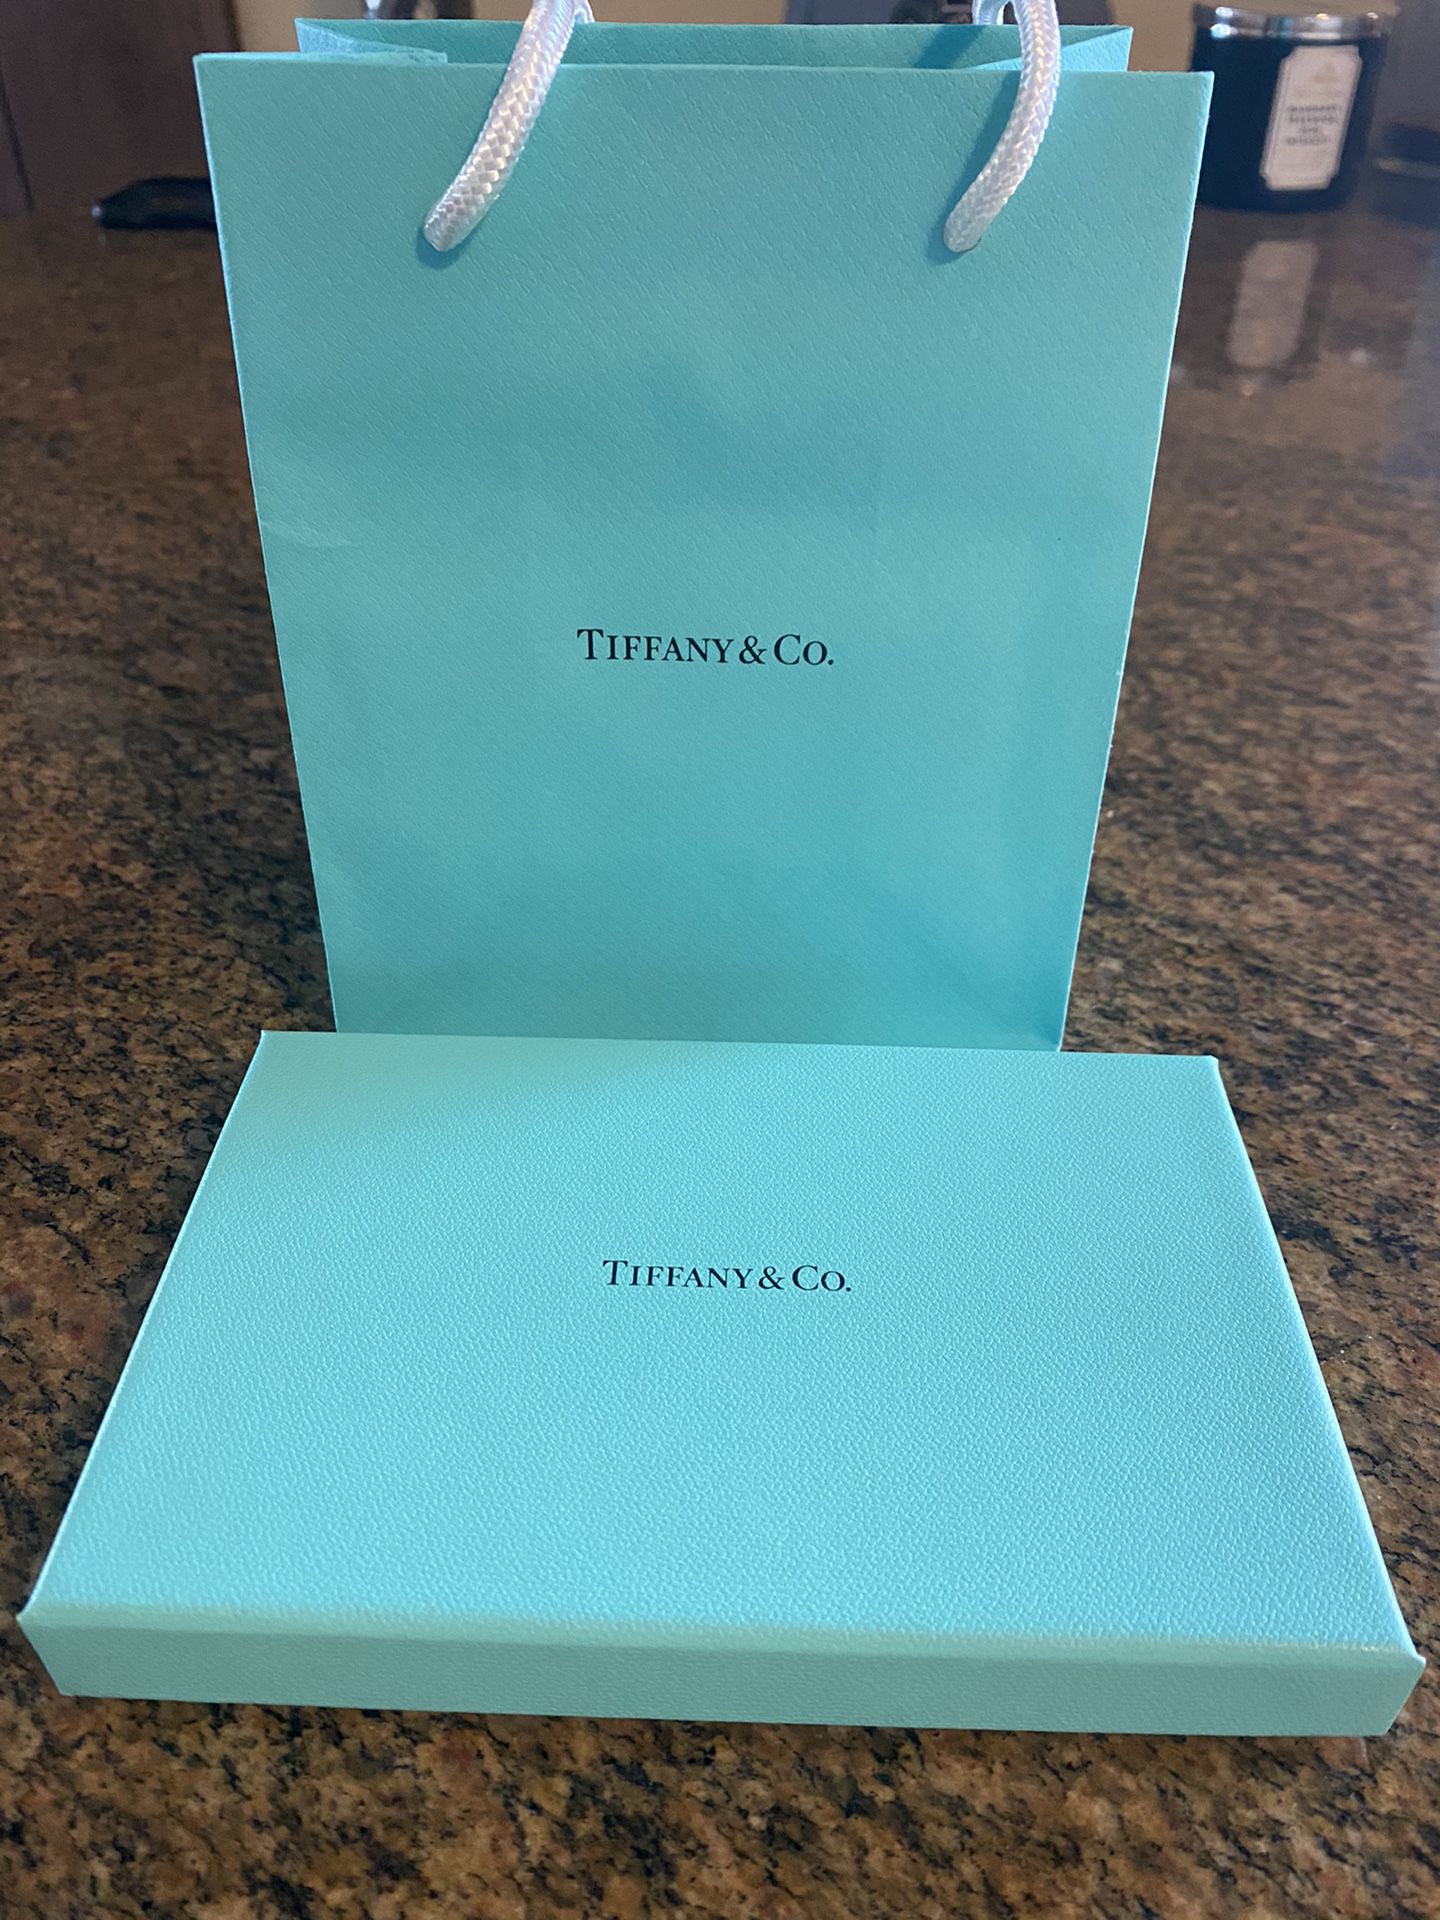 Tiffany and Co men’s diamond Card Holder for sale or trade